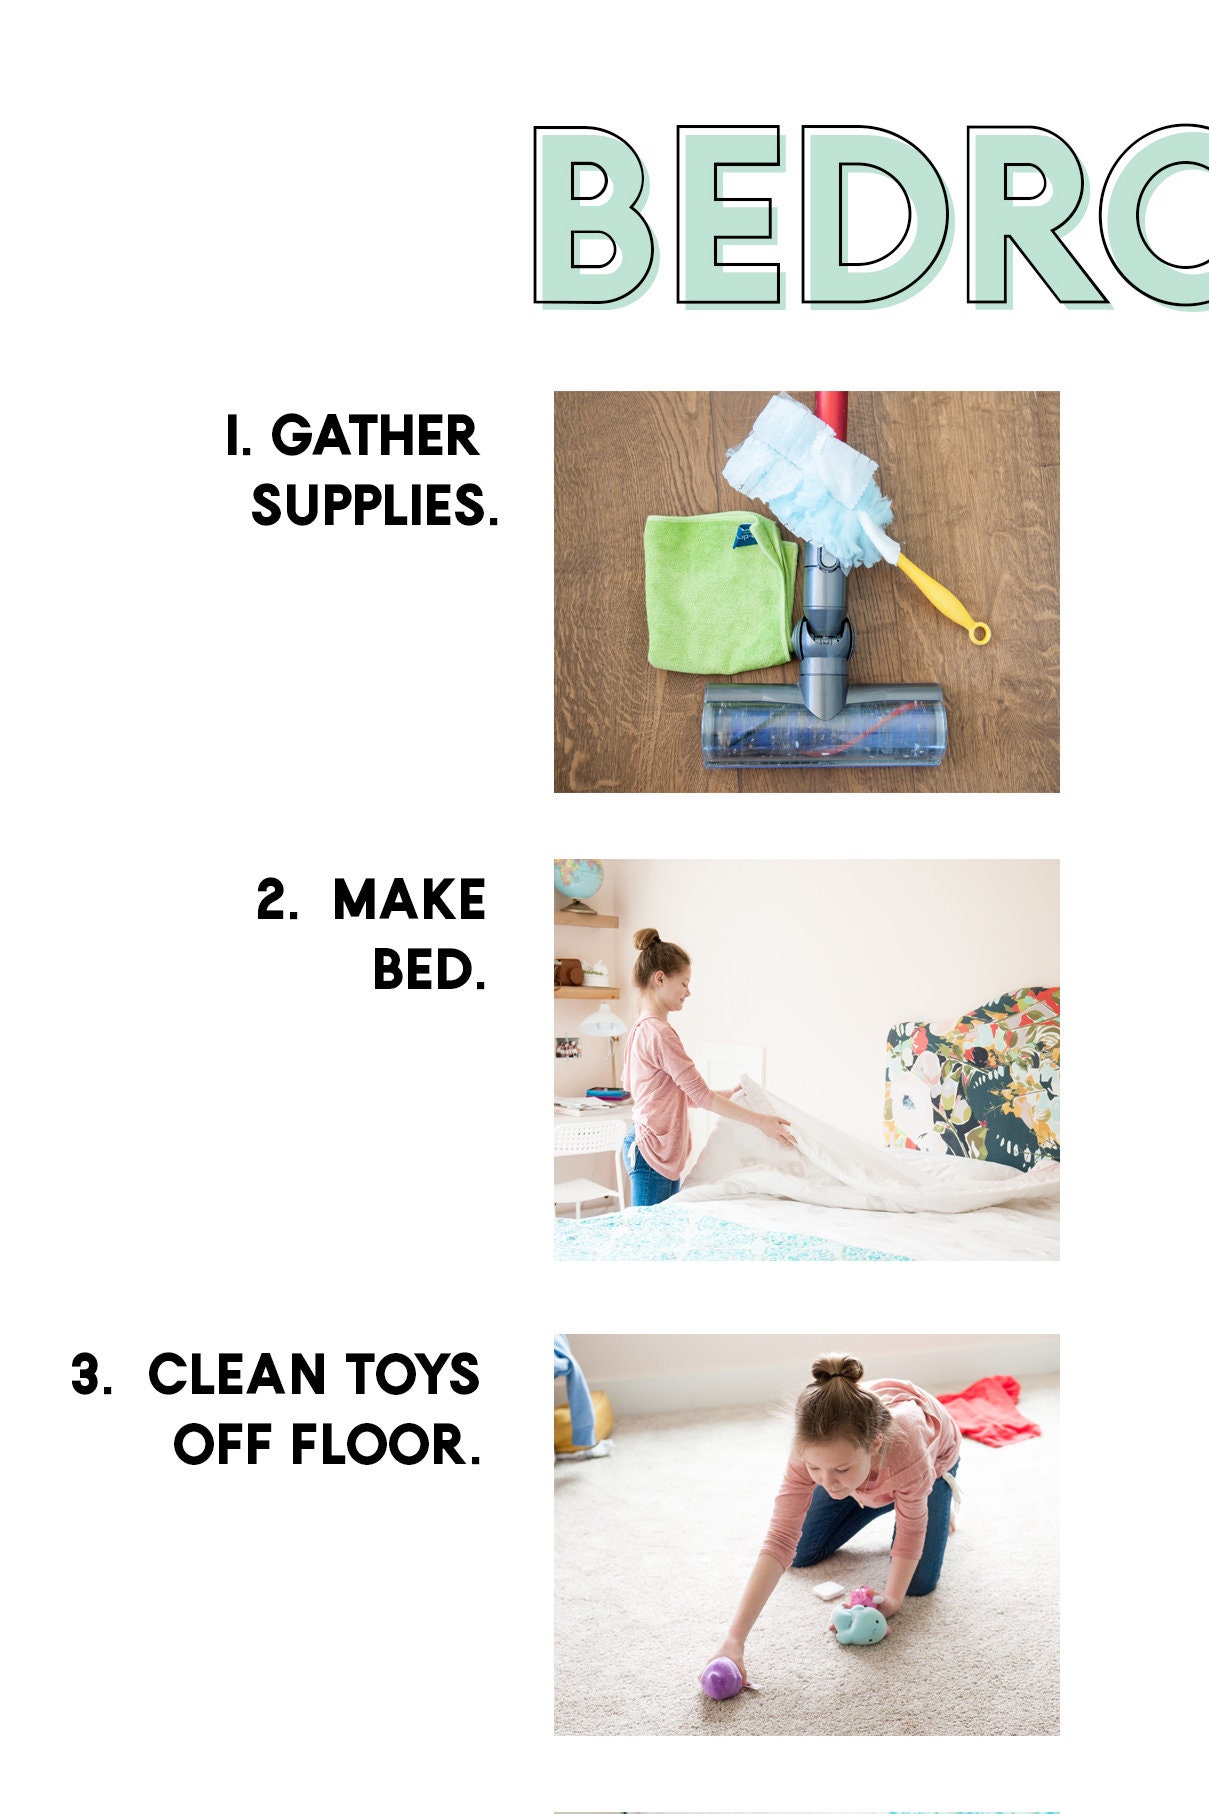 Cleaning this weekend? This interactive room-by-room guide will